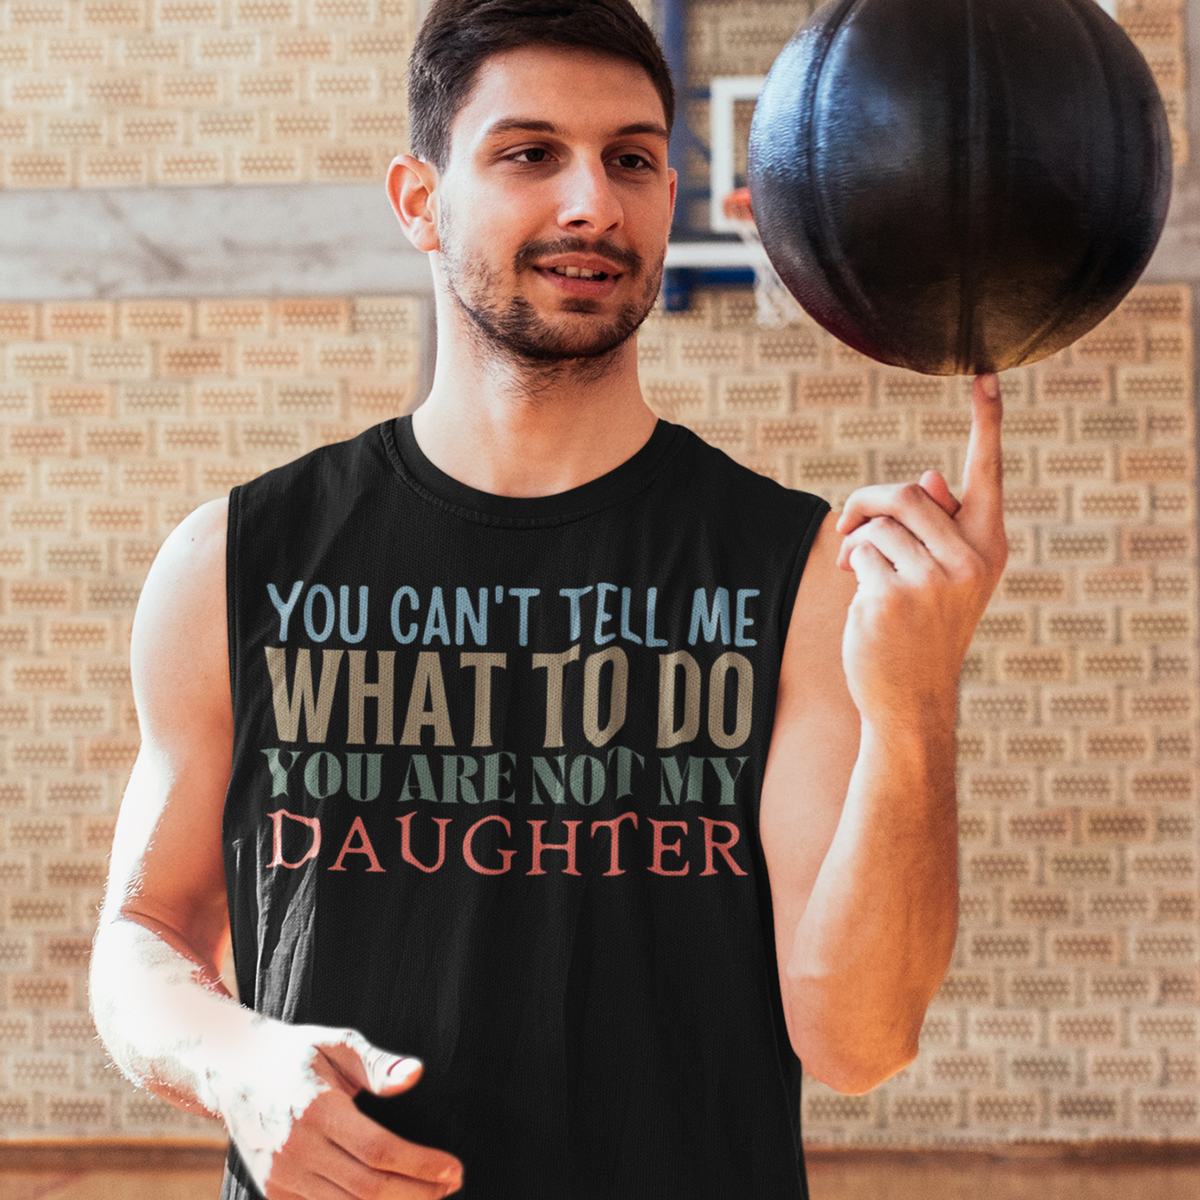 Dad Shirt, Fathers Day Shirt, Funny Mens Shirt, Funny Dad Shirt, Tell me what to do, Gift for him, Gift for her, New Papa Gift, Funny Mom Shirt, Mom Shirt, New Dad Shirt, Father Shirt, Dad tee, You Can't tell me What To Do You Are Not My Daughter Shirt, Muscle Shirt, Sleeveless Shirt